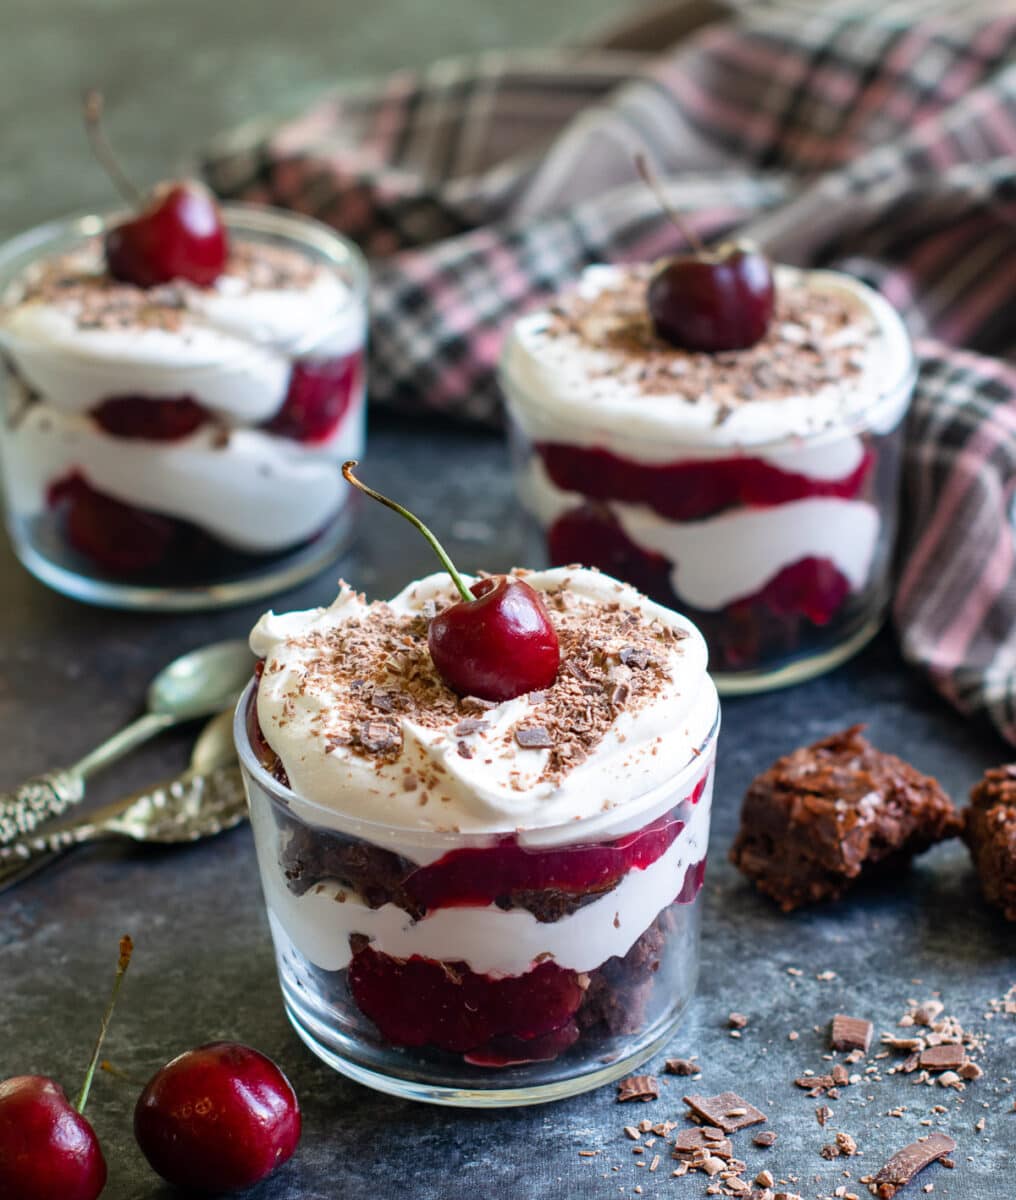 Black forest trifle jars with spoons on the side.